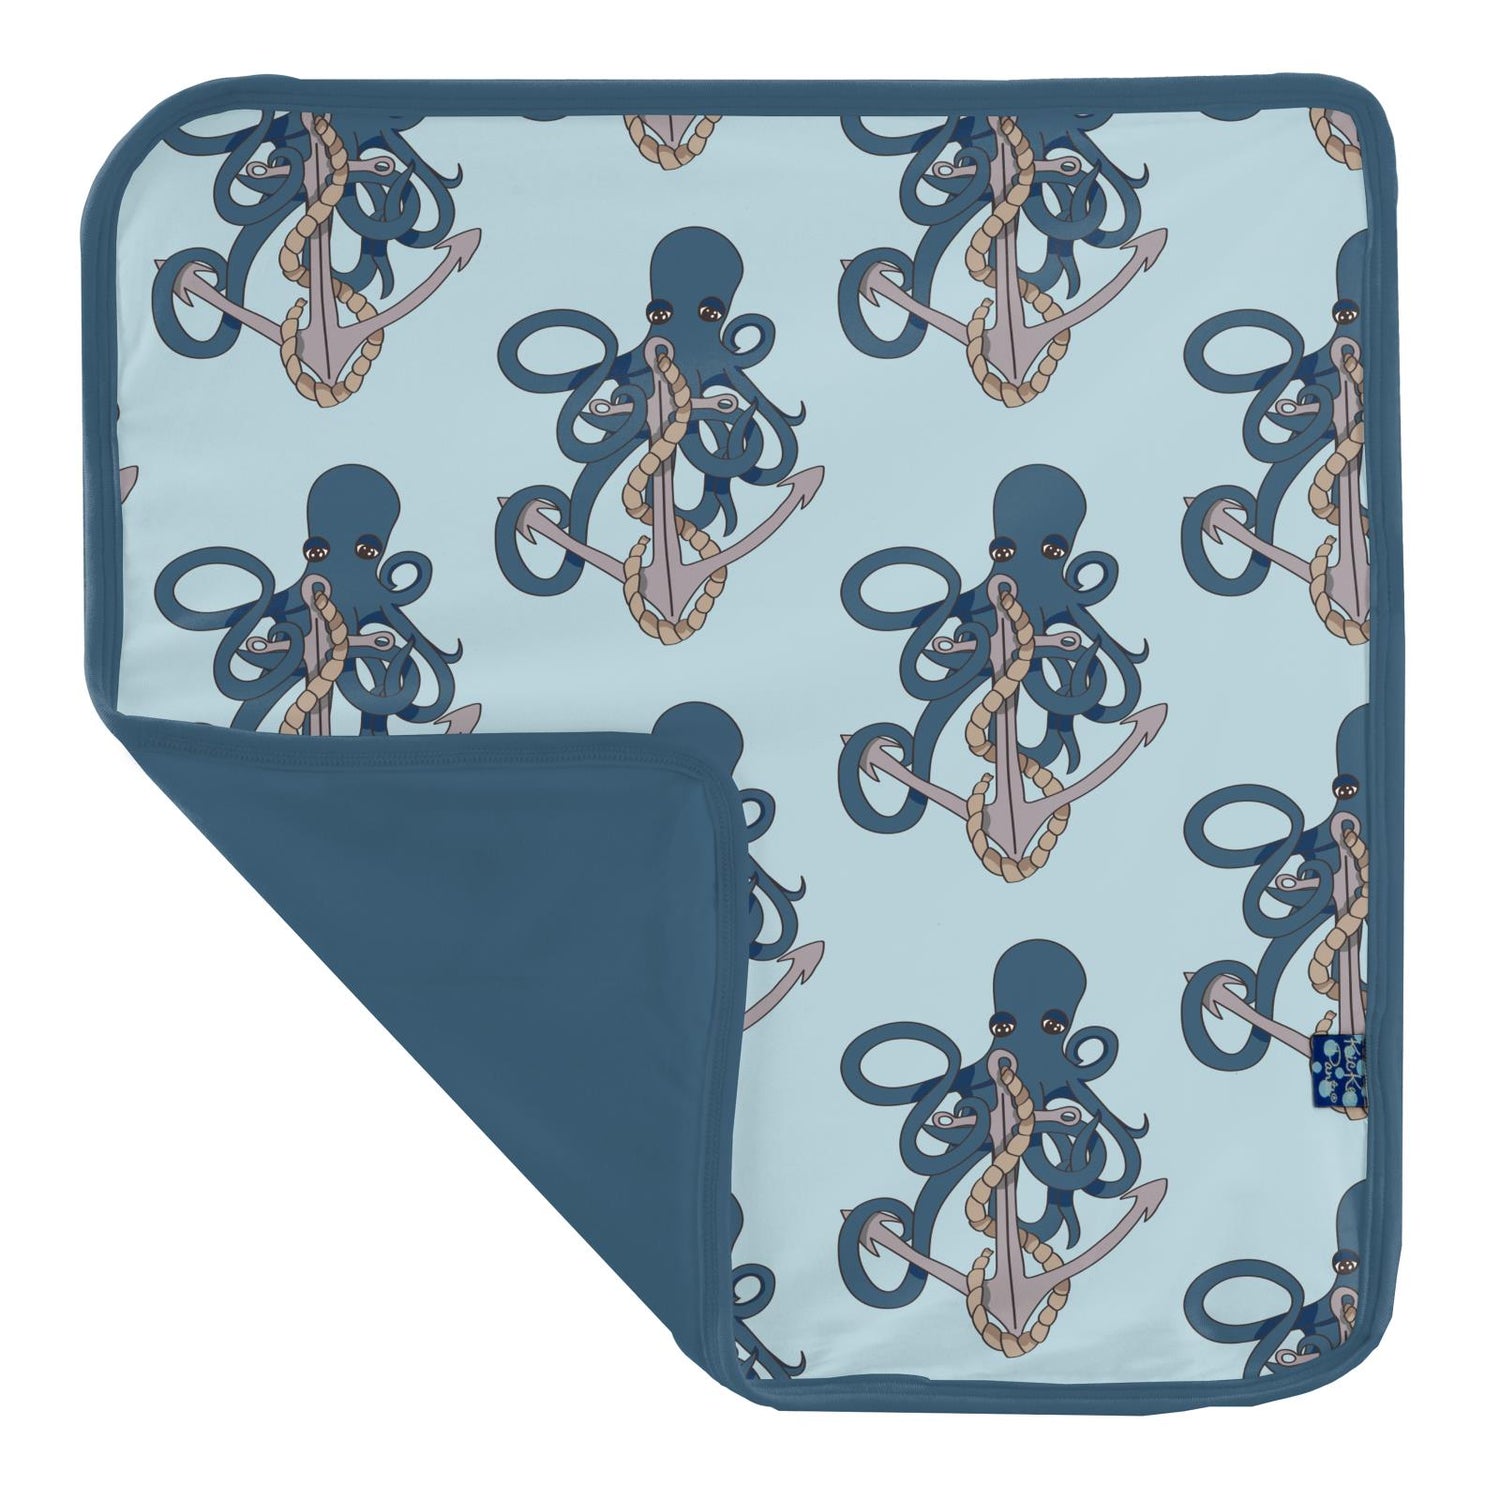 Print Lovey in Spring Sky Octopus Anchor